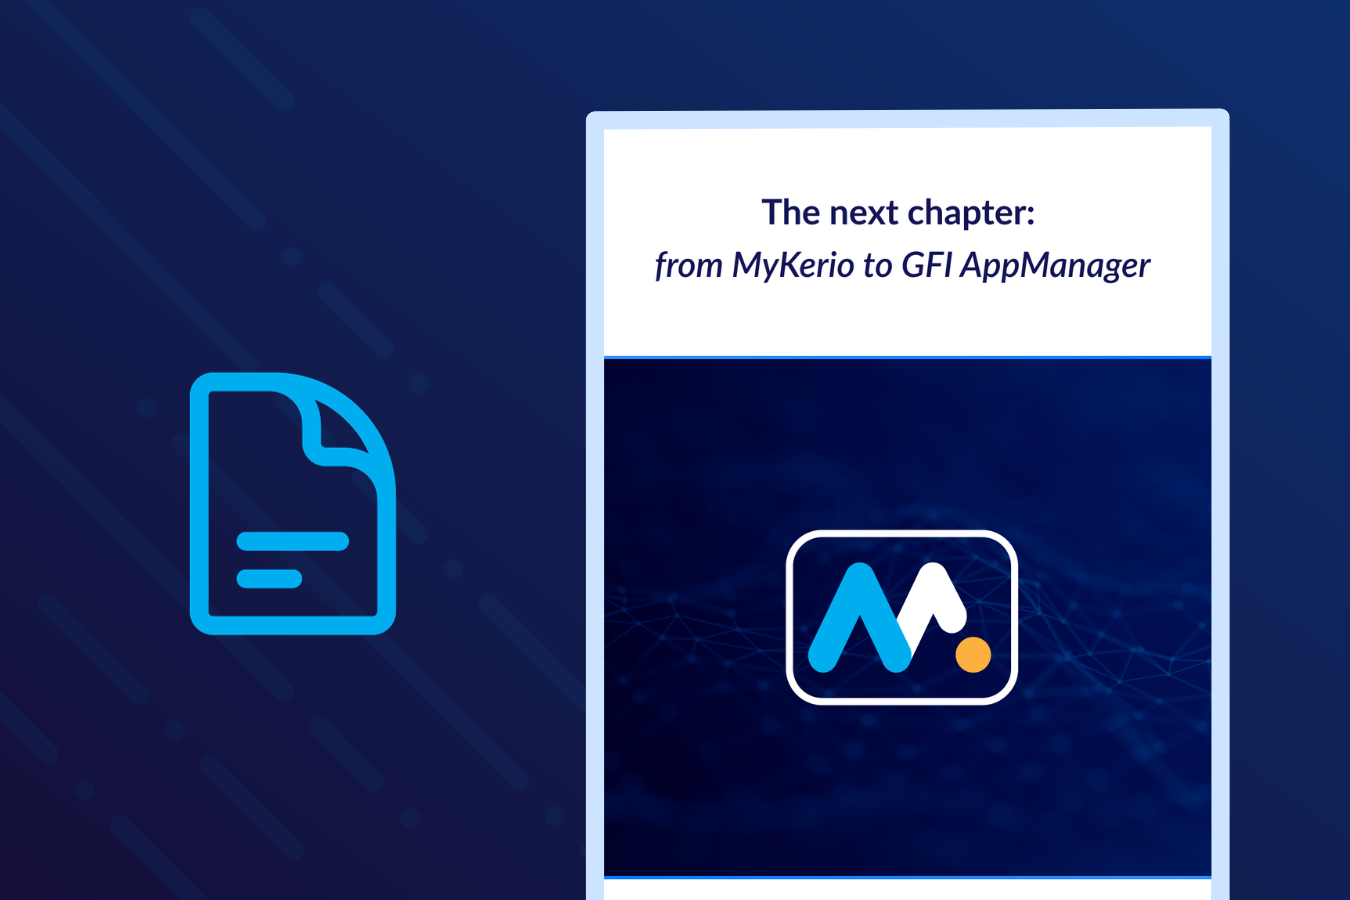 The next chapter - from MyKerio to GFI AppManager